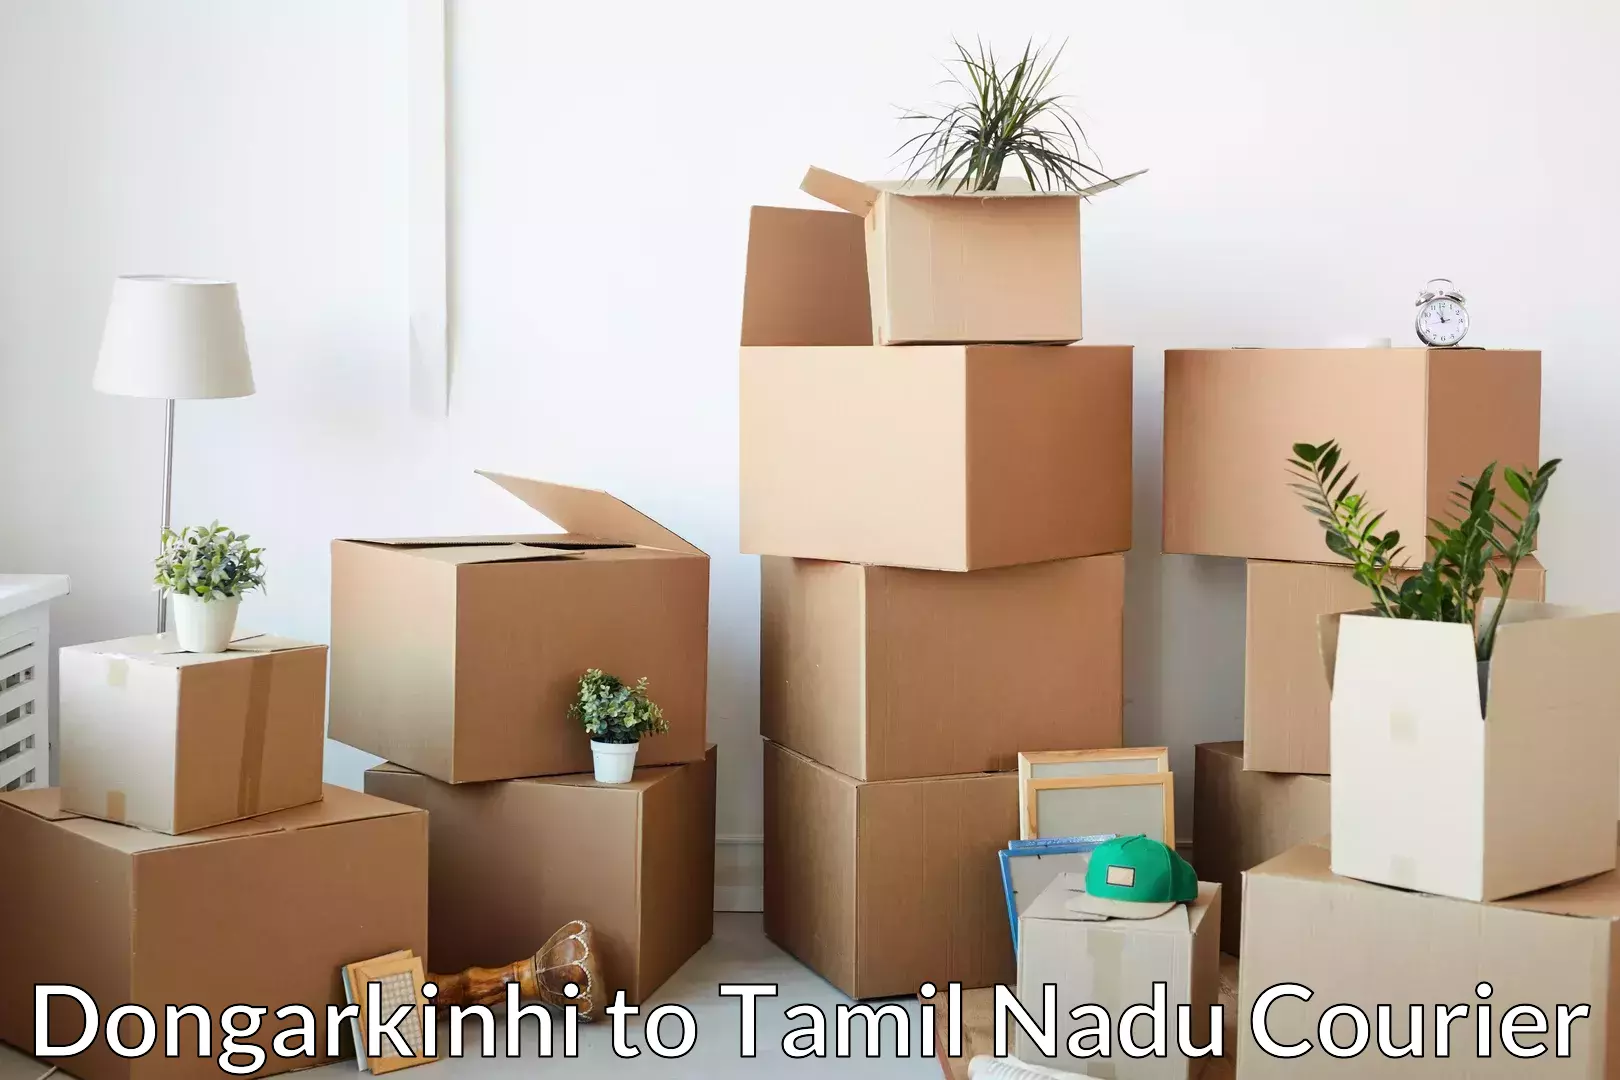 Affordable relocation services Dongarkinhi to Ennore Port Chennai